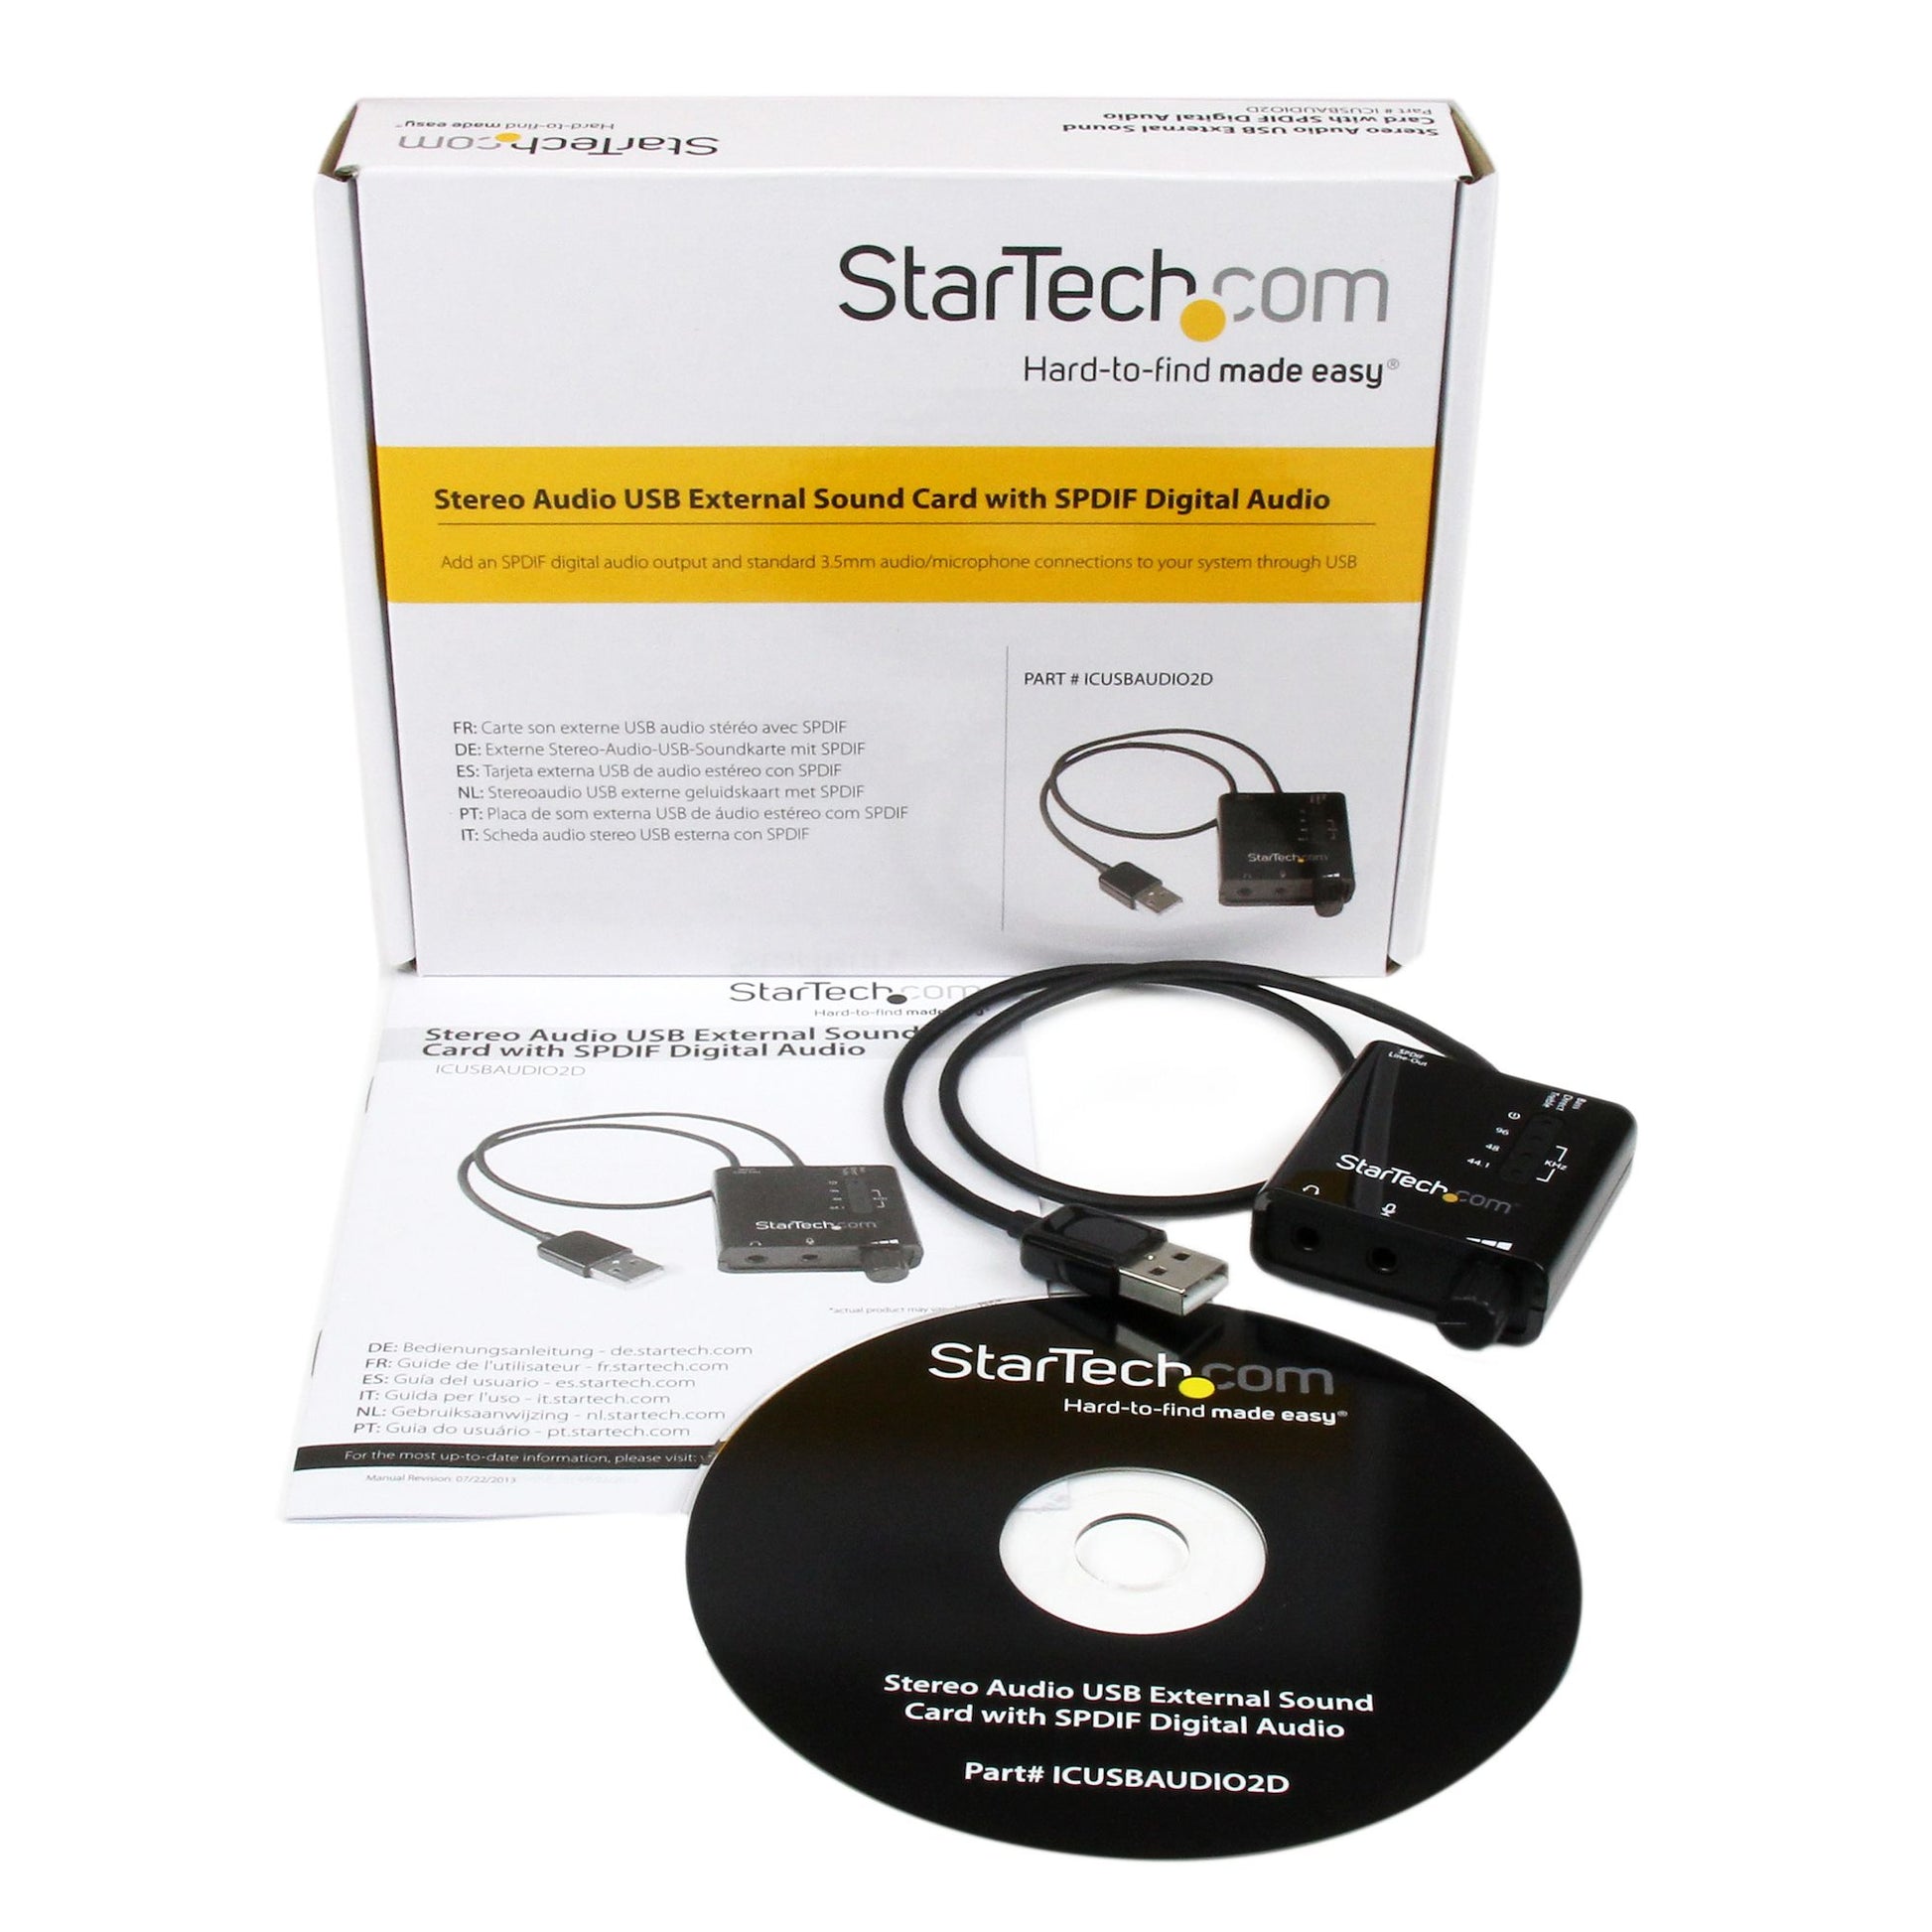 StarTech.com USB Stereo Audio Adapter External Sound Card with SPDIF Digital Audio and Stereo Mic-4